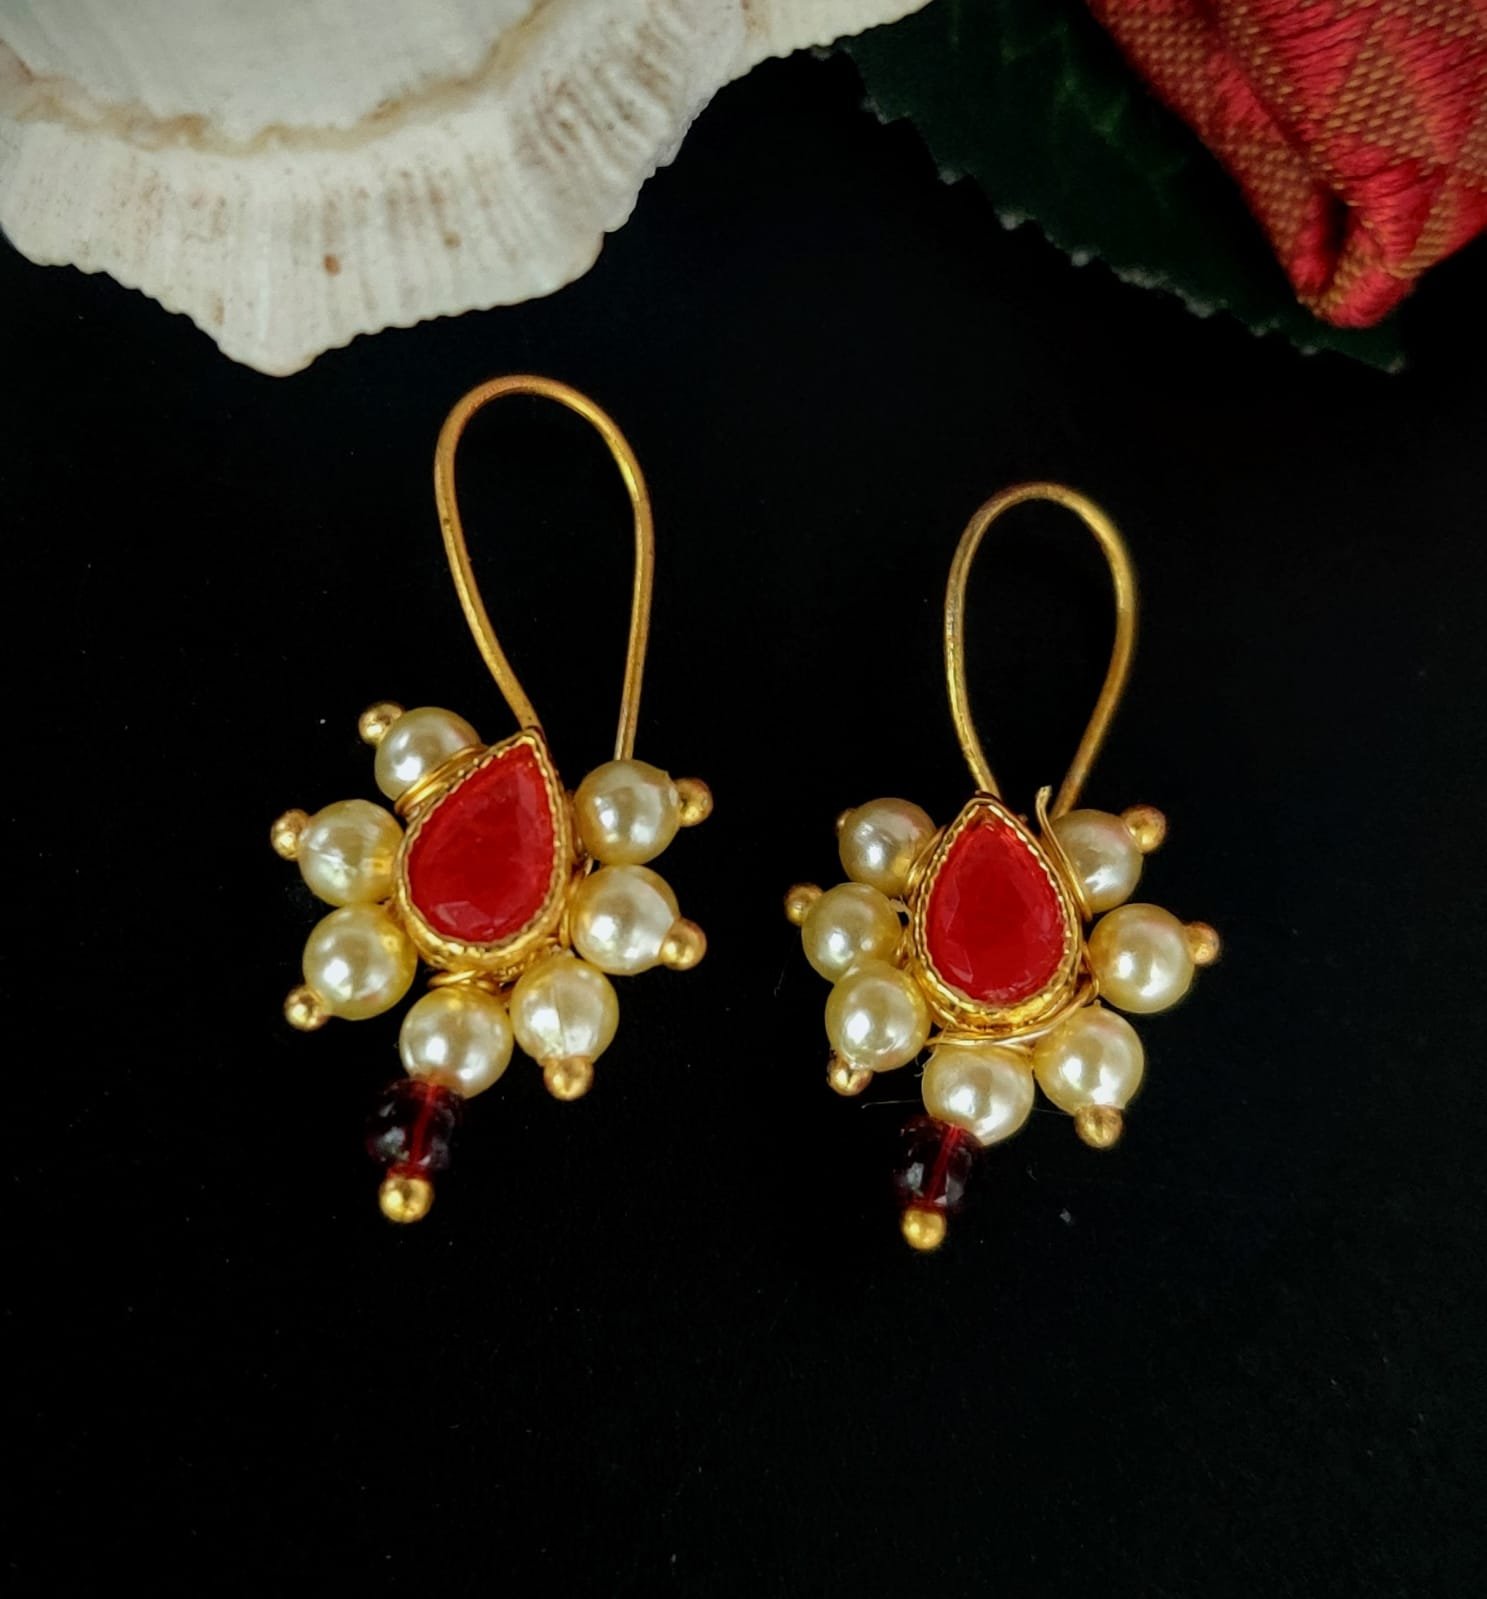 Antique 14 Karat Gold Red Coral Earrings | Heztia